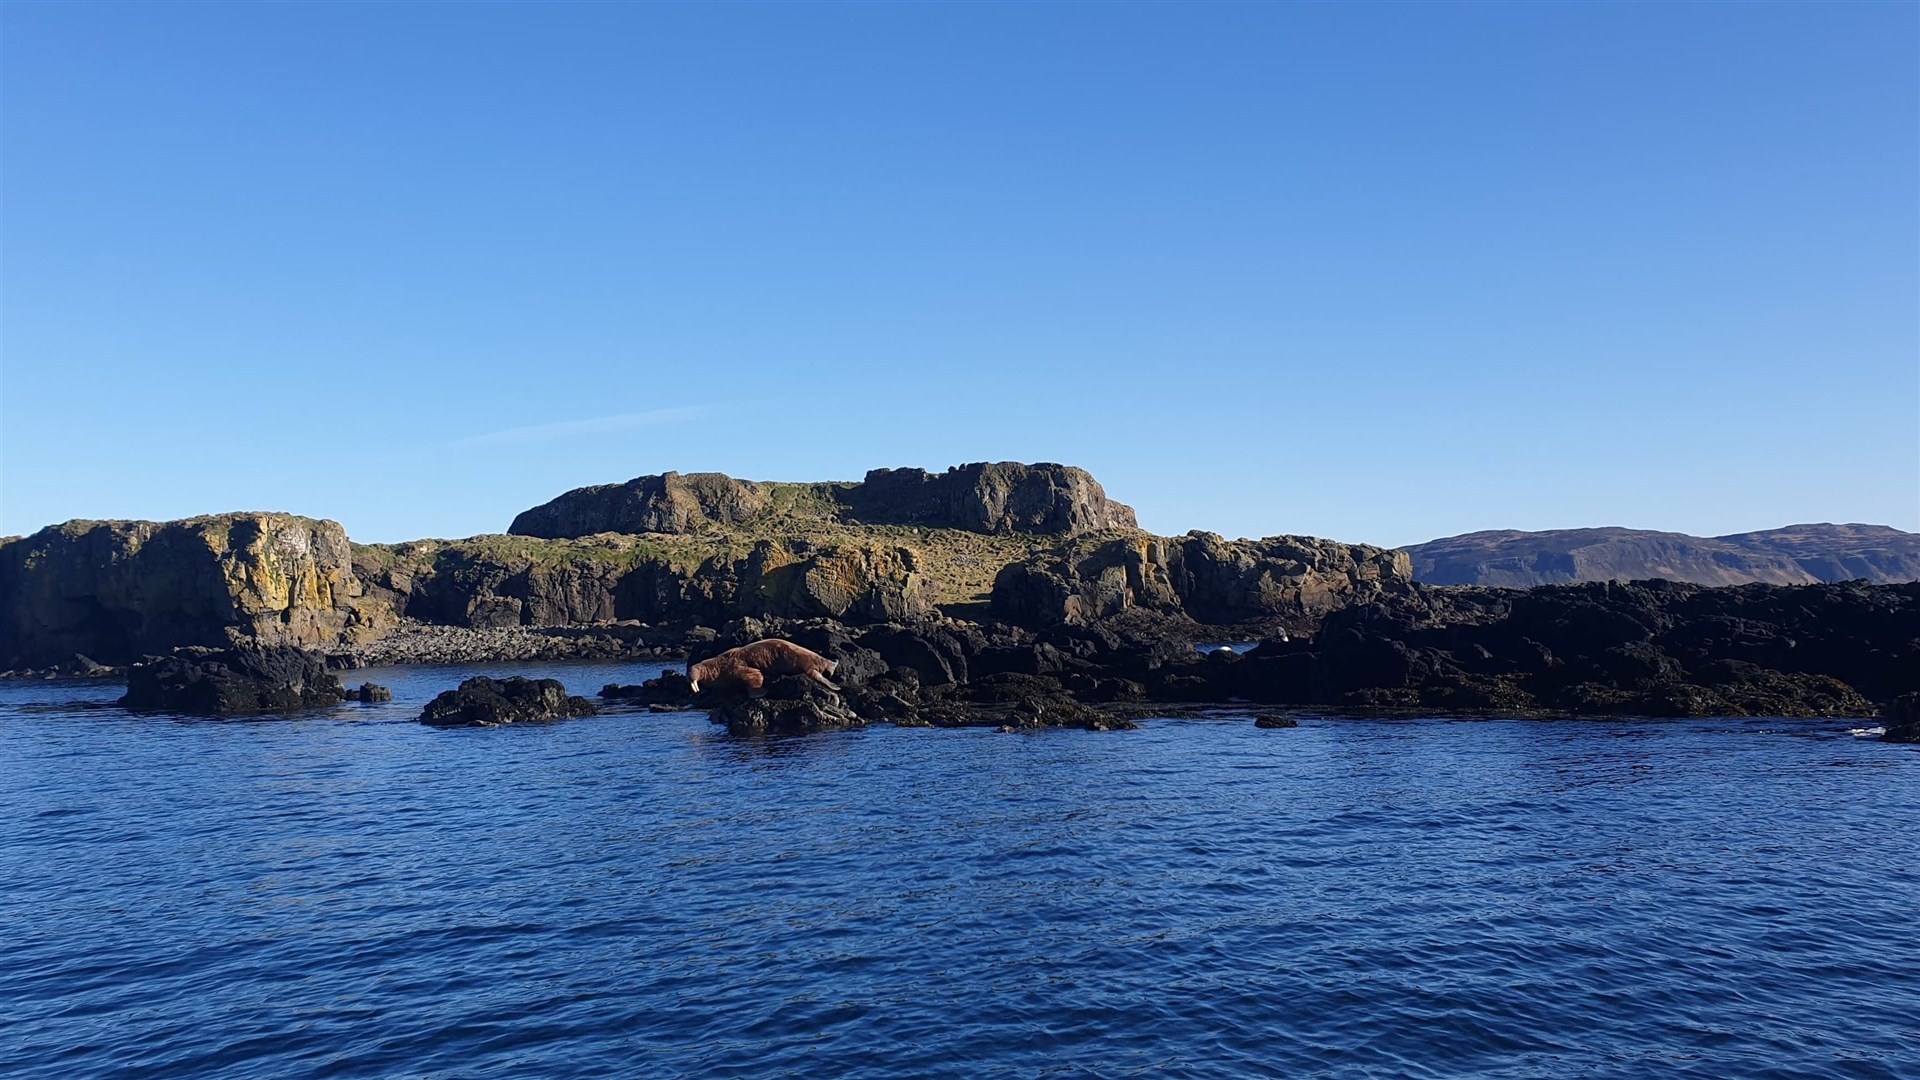 The walrus was spotted by Lorn MacRae who took this picture on a small island which forms part of the Treshnish Isles.